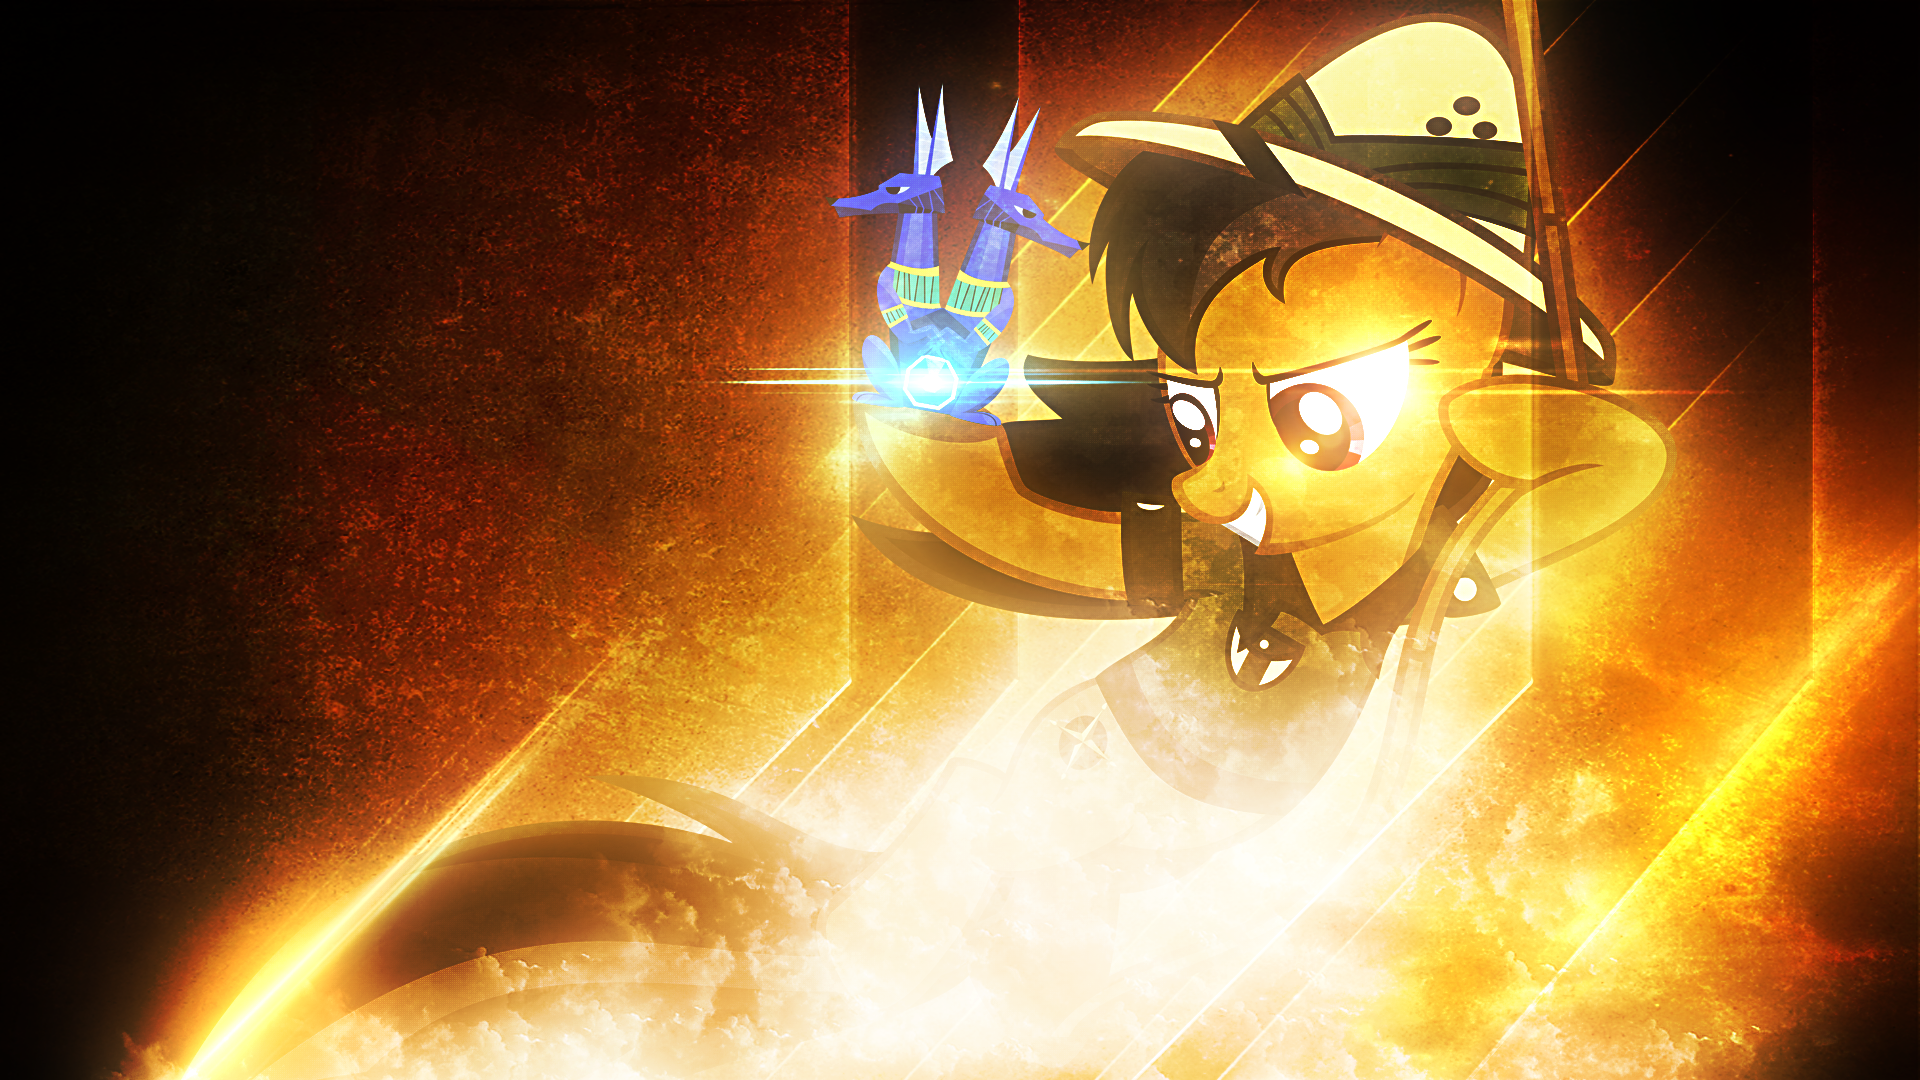 Daring Do and the Sapphire Statue - Wallpaper by delectablecoffee and Tzolkine